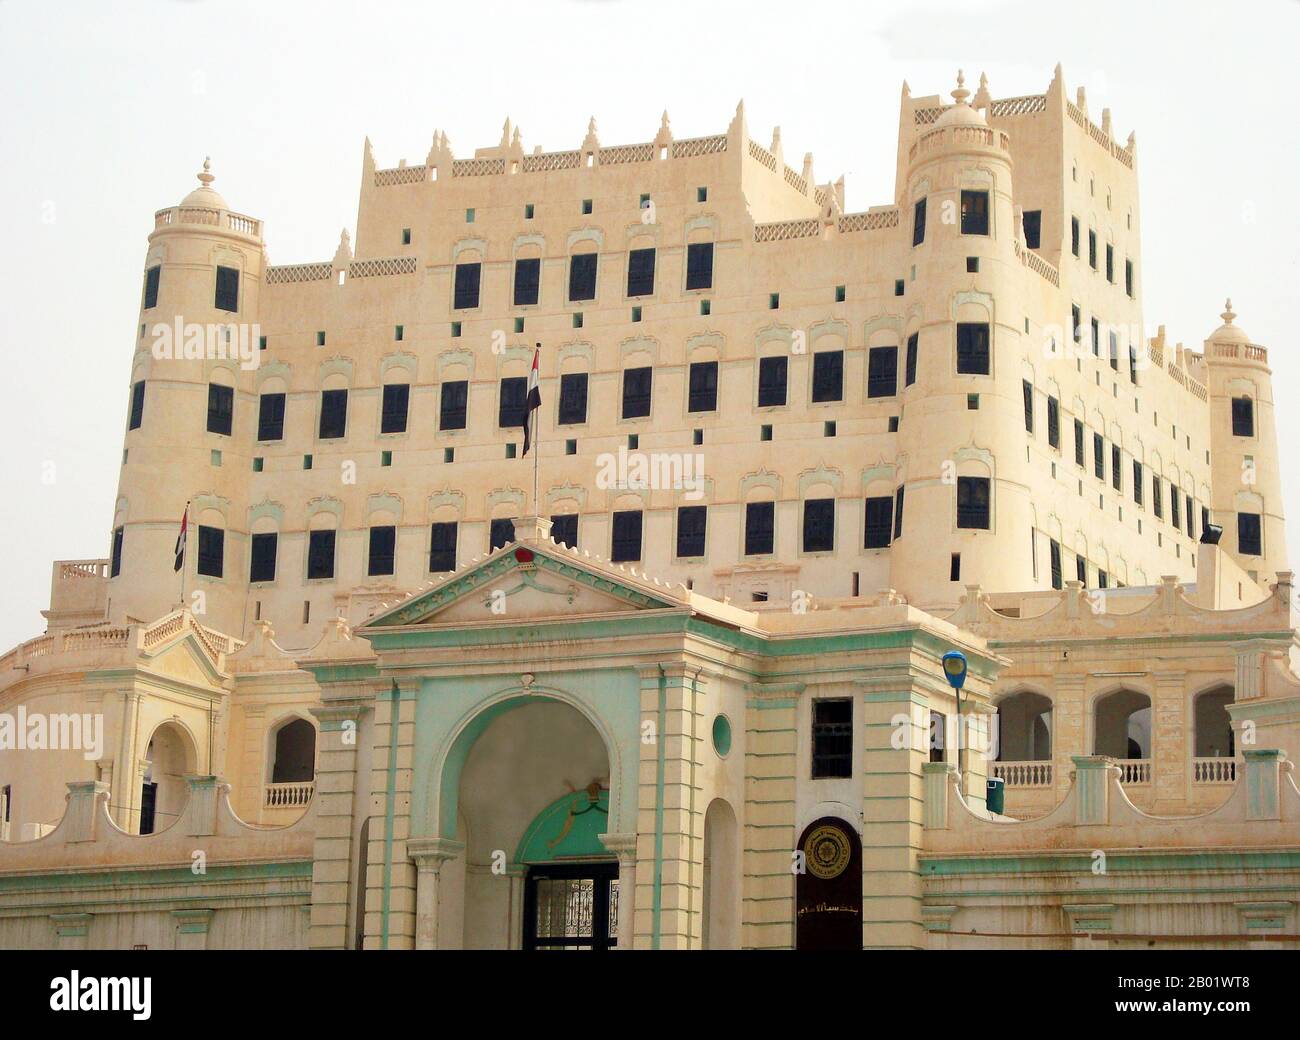 Yemen: The Sultan Al Kathiri Palace, Seiyun, Hadramawt, former seat of the Al-Kathiri Sultanate. Photo by Aiman Alhaddad (CC BY-SA 3.0 License).  Kathiri, officially the Hadhrami Kathiri Dynasty in Seiyun, was a sultanate in the Hadhramaut region of the southern Arabian Peninsula, in what is now officially considered part of Yemen and the Dhofar region of Oman.  The Kathiris once ruled much of Hadhramaut but their power was truncated by the rival Qu'aitis in the 19th century. The Kathiris were eventually restricted to a small inland portion of Hadhramaut with their capital at Seiyun (Say'un). Stock Photo